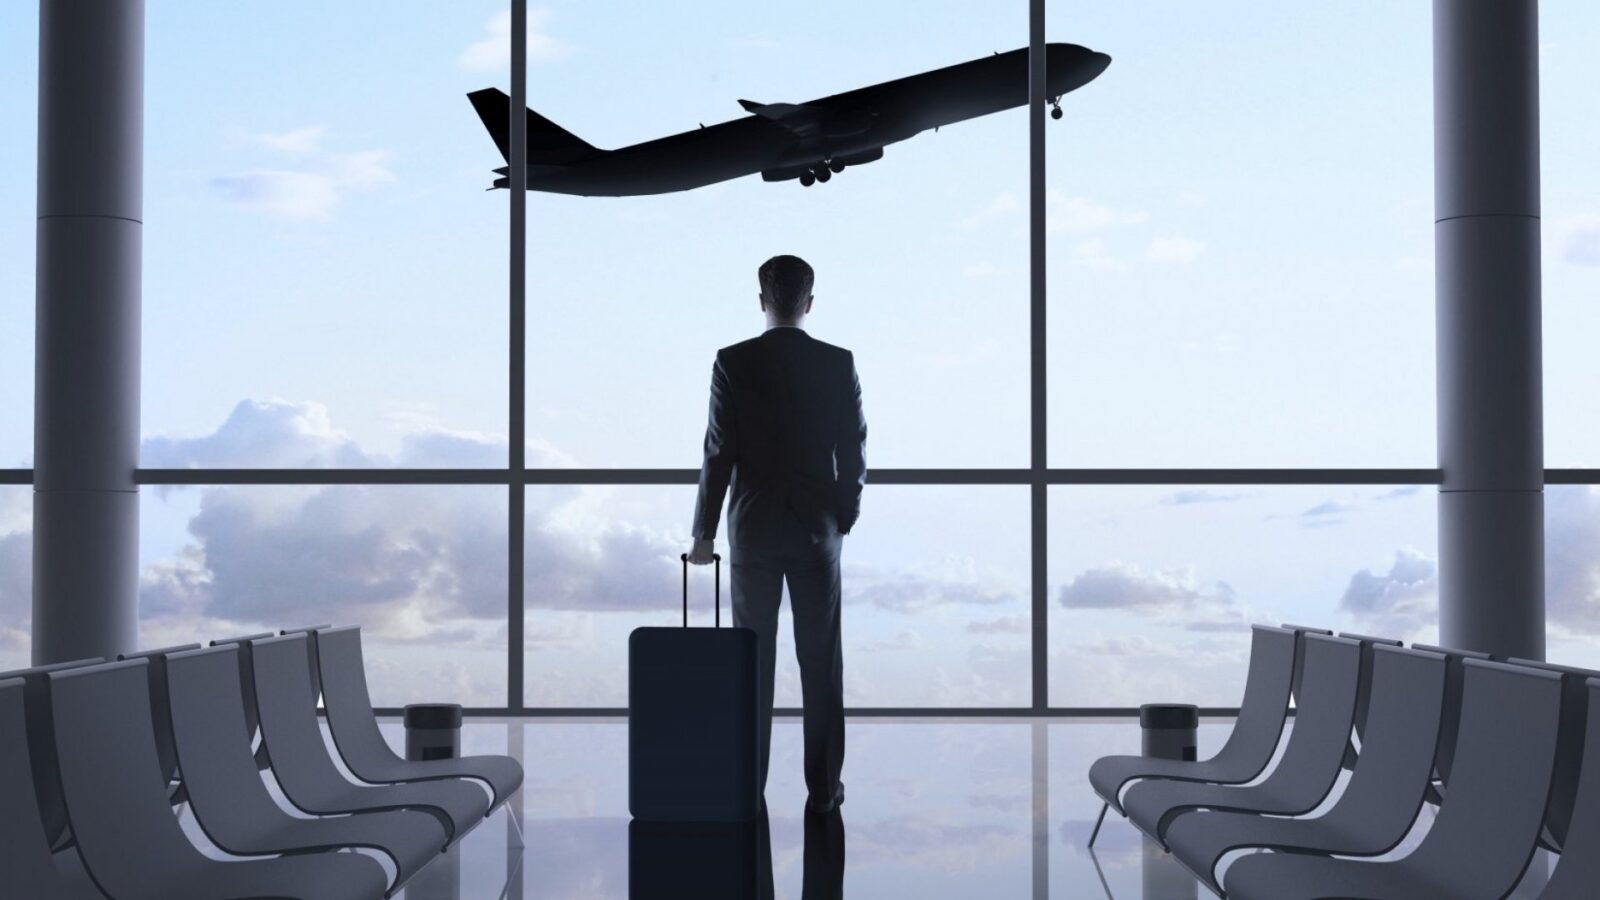 How Well Do You Handle Stress? Airplane business travel airport